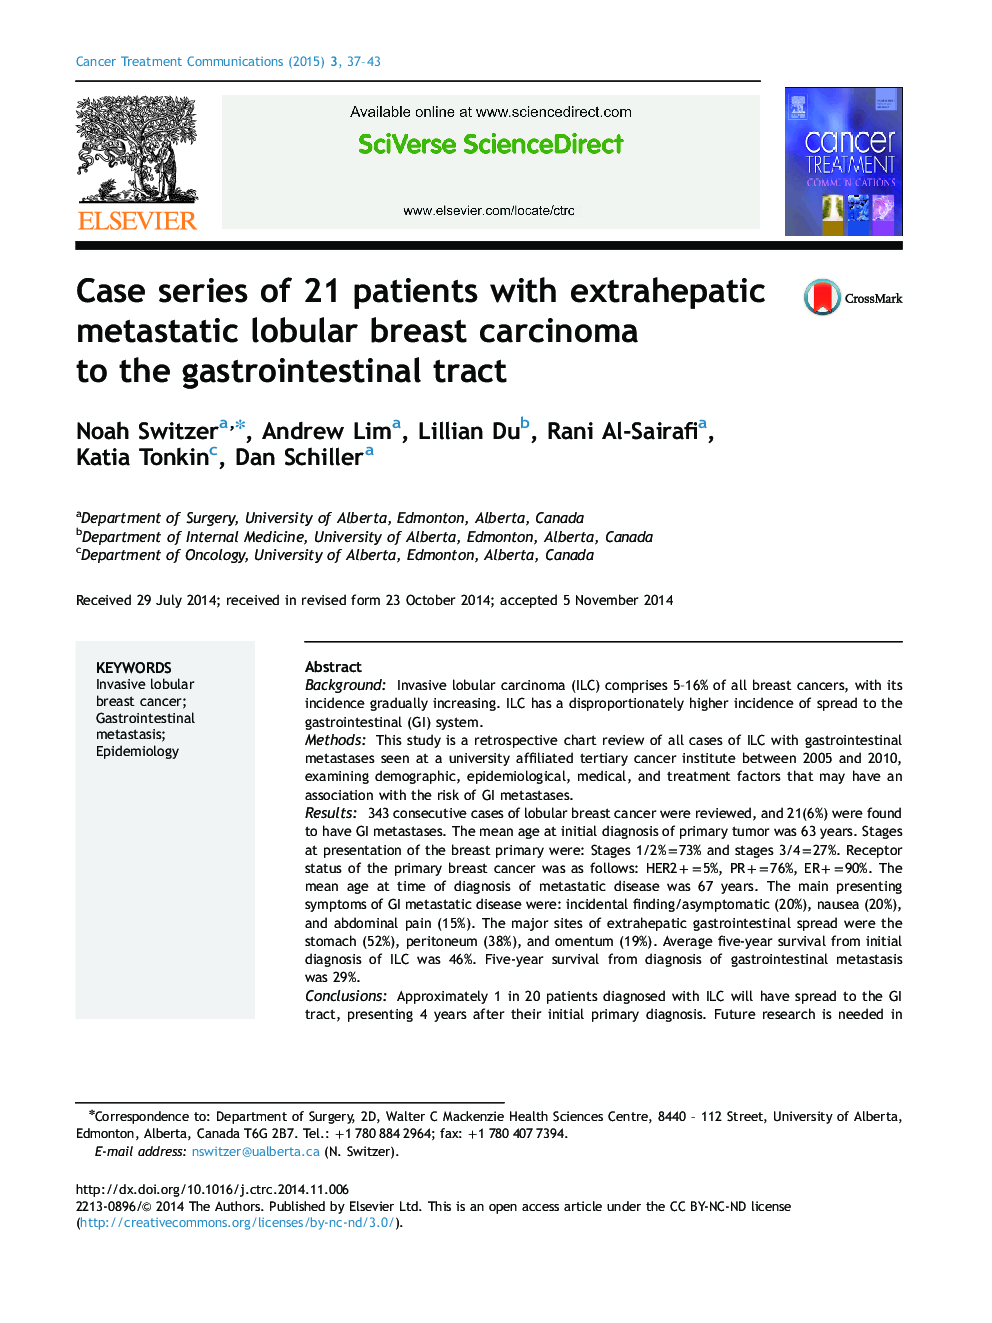 Case series of 21 patients with extrahepatic metastatic lobular breast carcinoma to the gastrointestinal tract